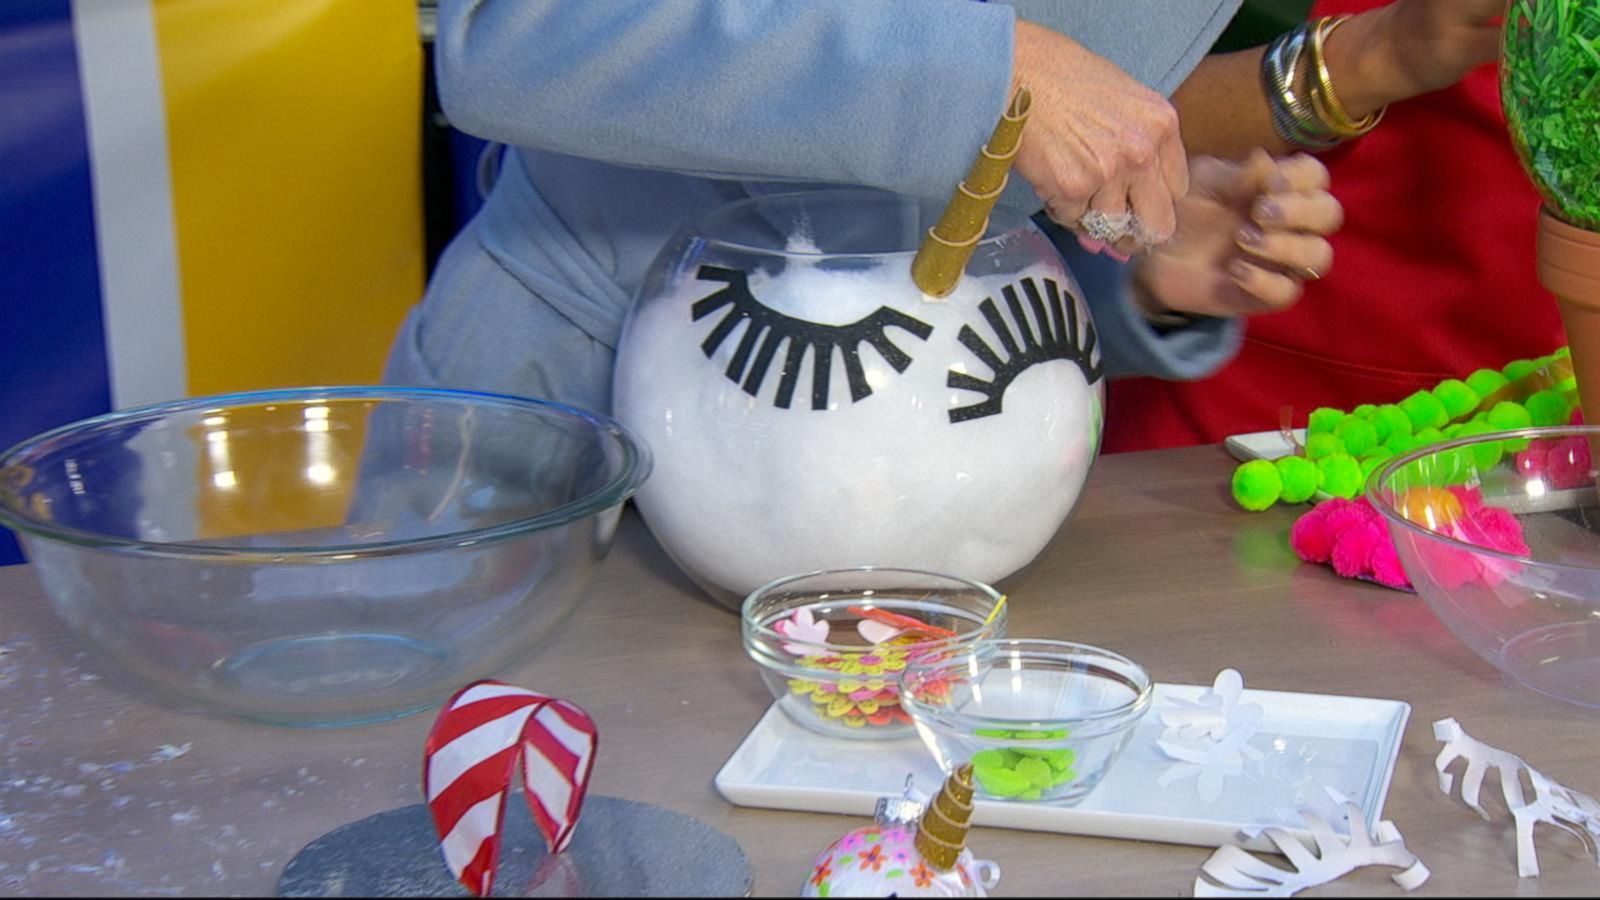 VIDEO: How to make your own DIY Christmas ornaments